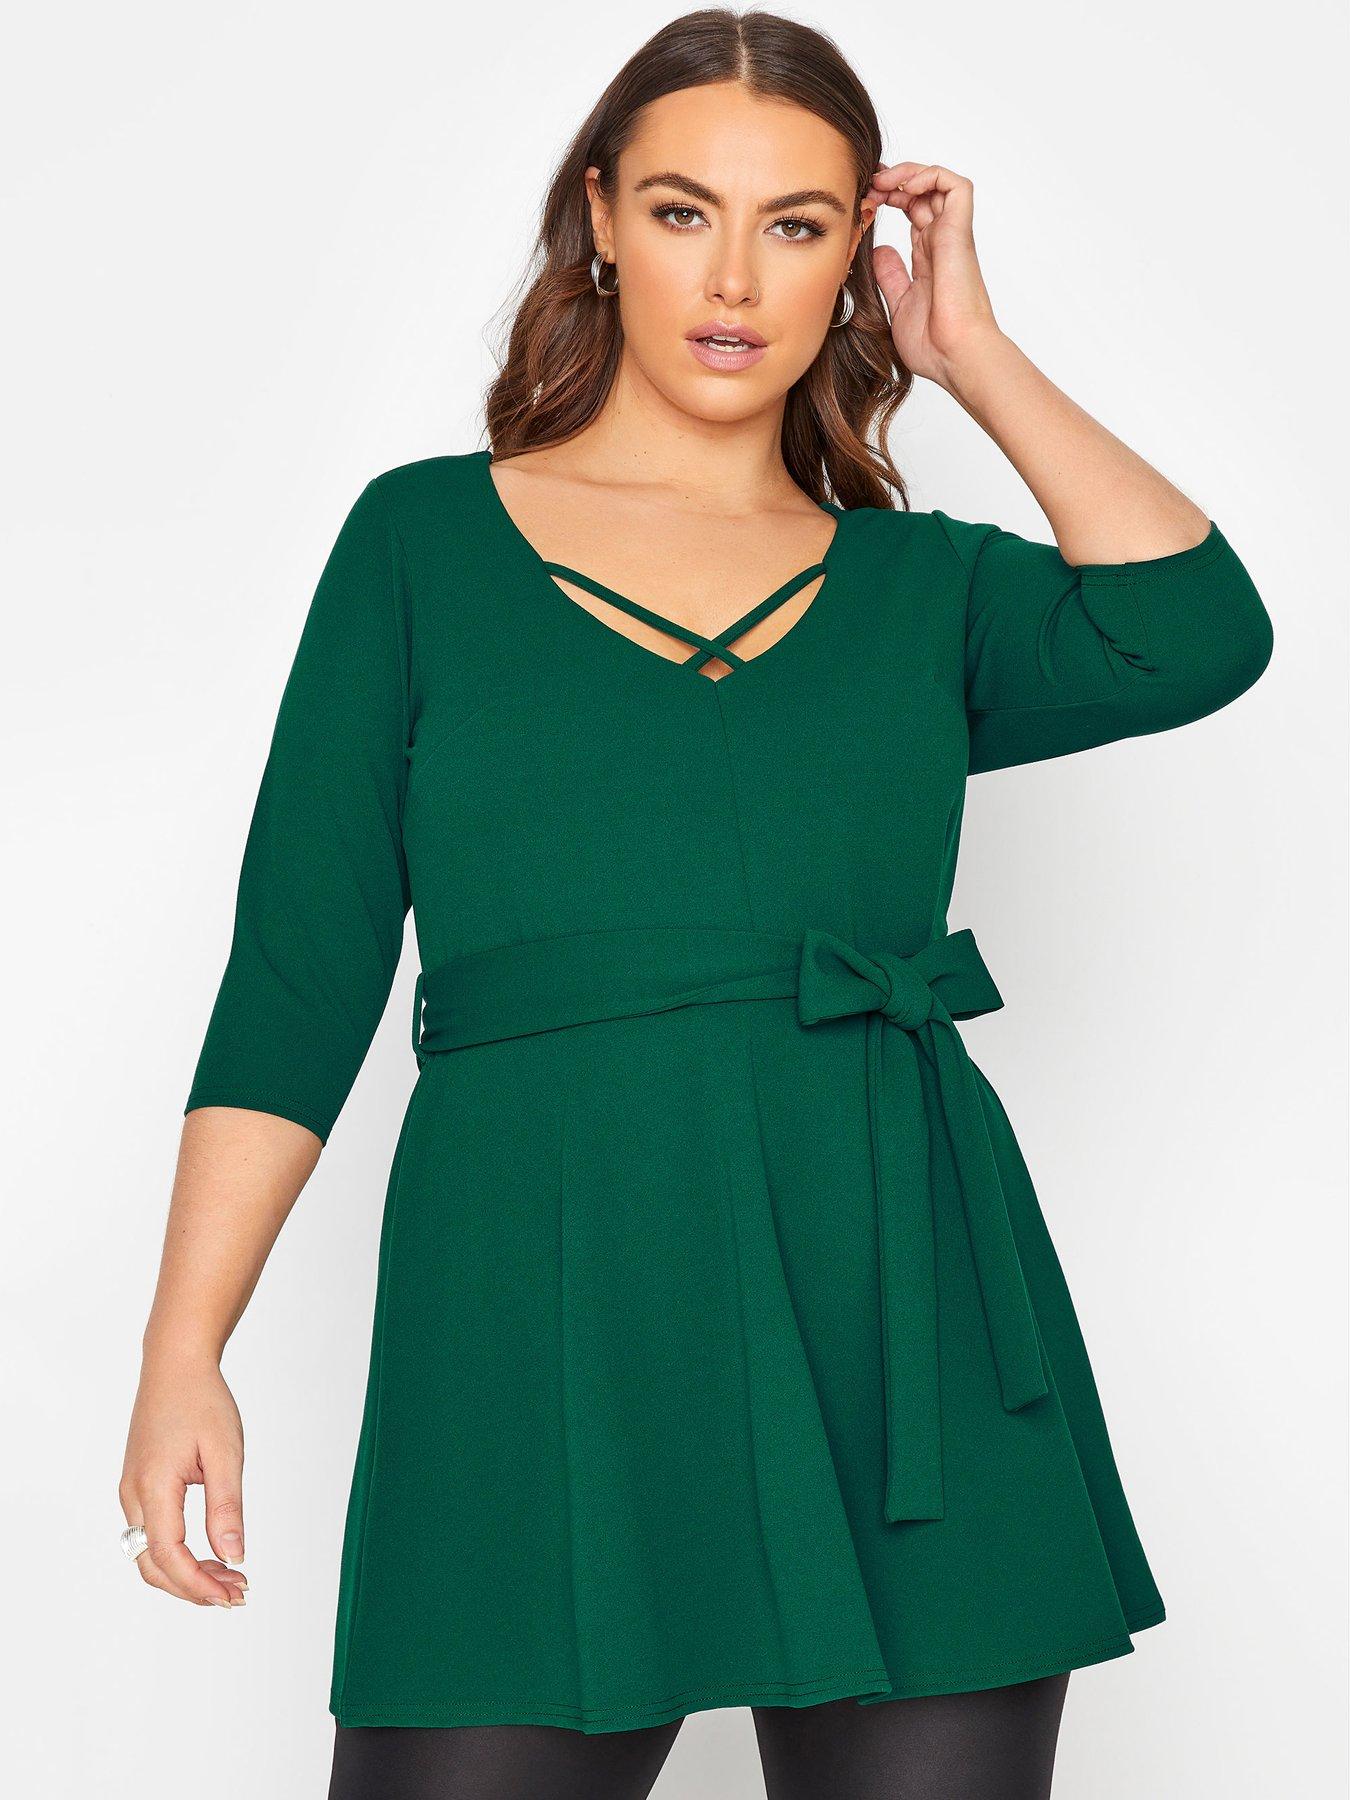 Blouses & shirts Yours London Cross Front Peplum Top - Forest Green